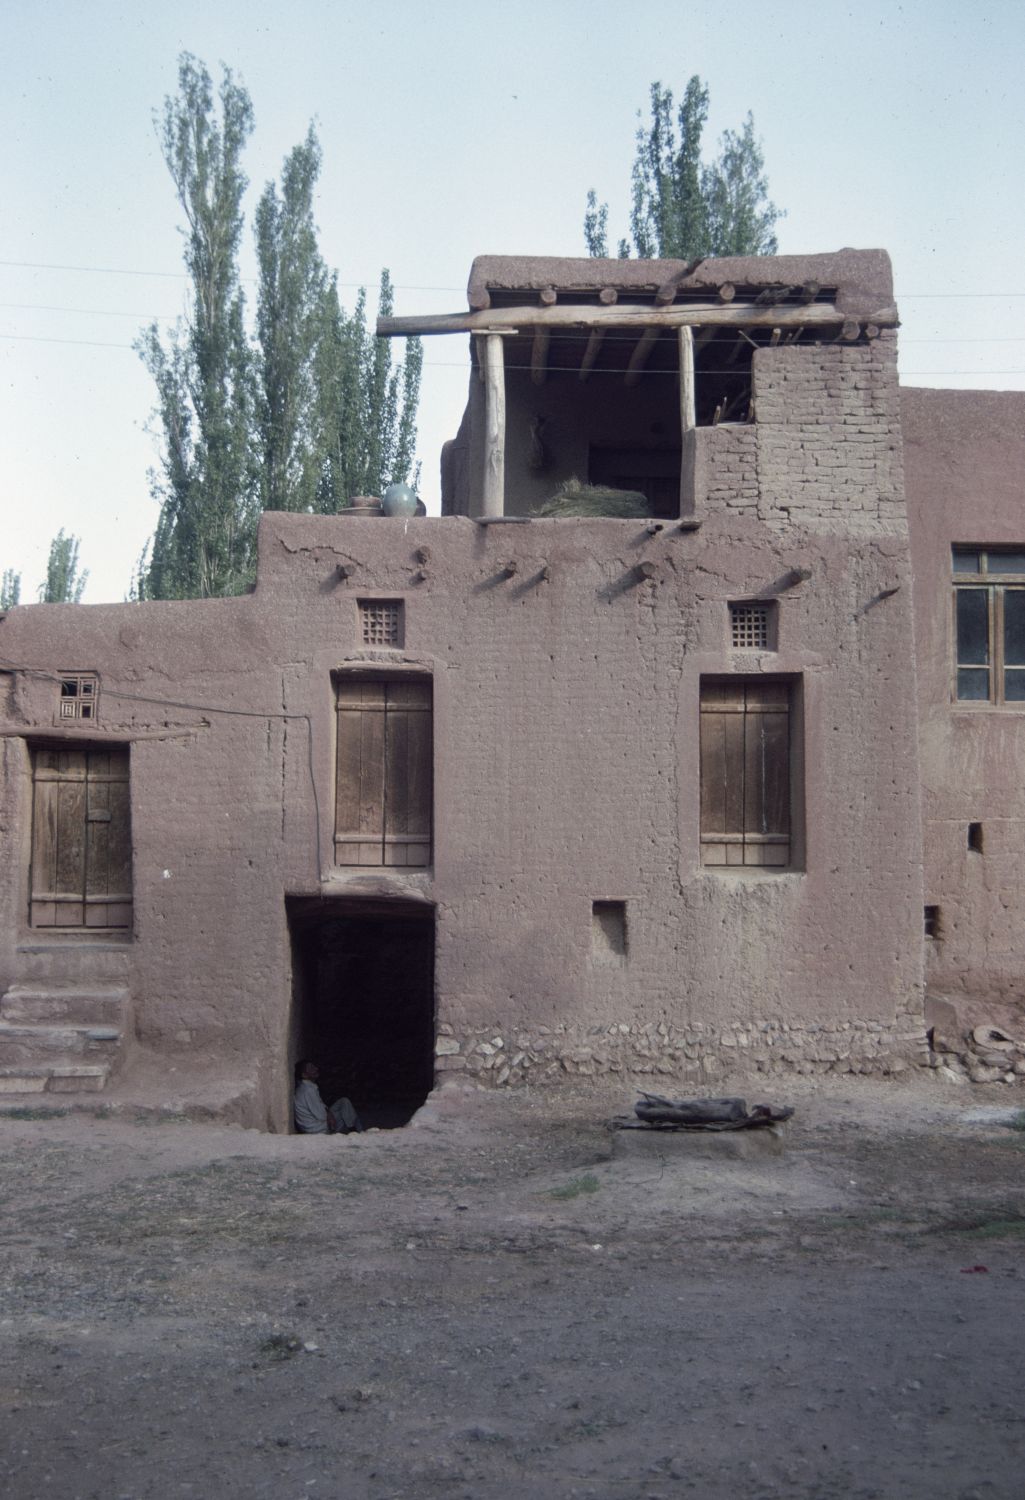 View of a traditional house in Abyanah, Iran.